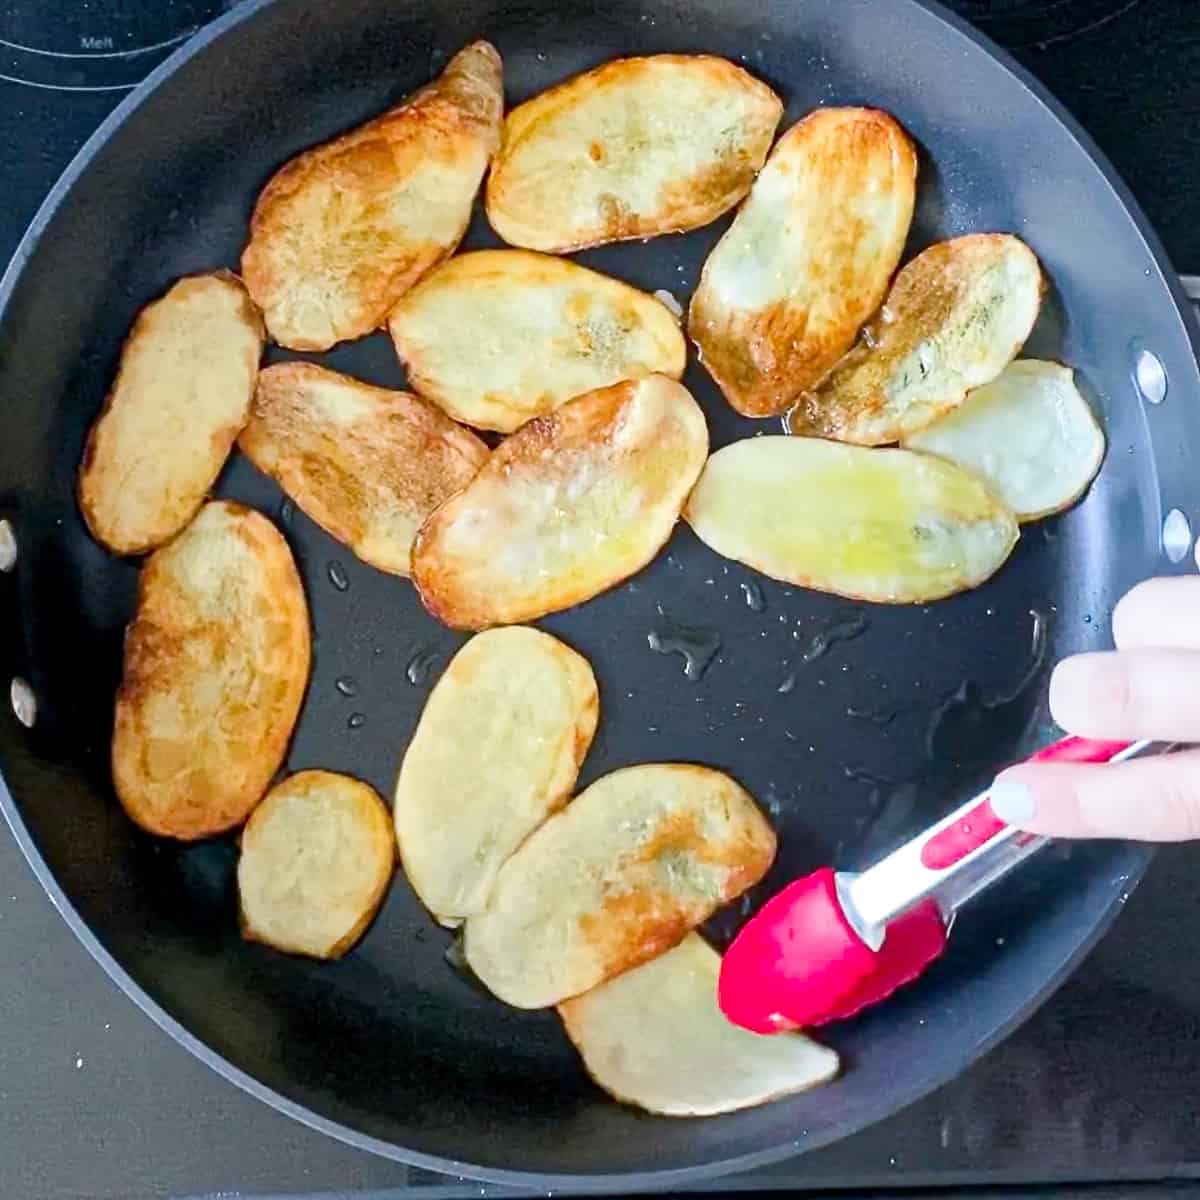 Tongs moving thinly sliced potatoes around on skillet.